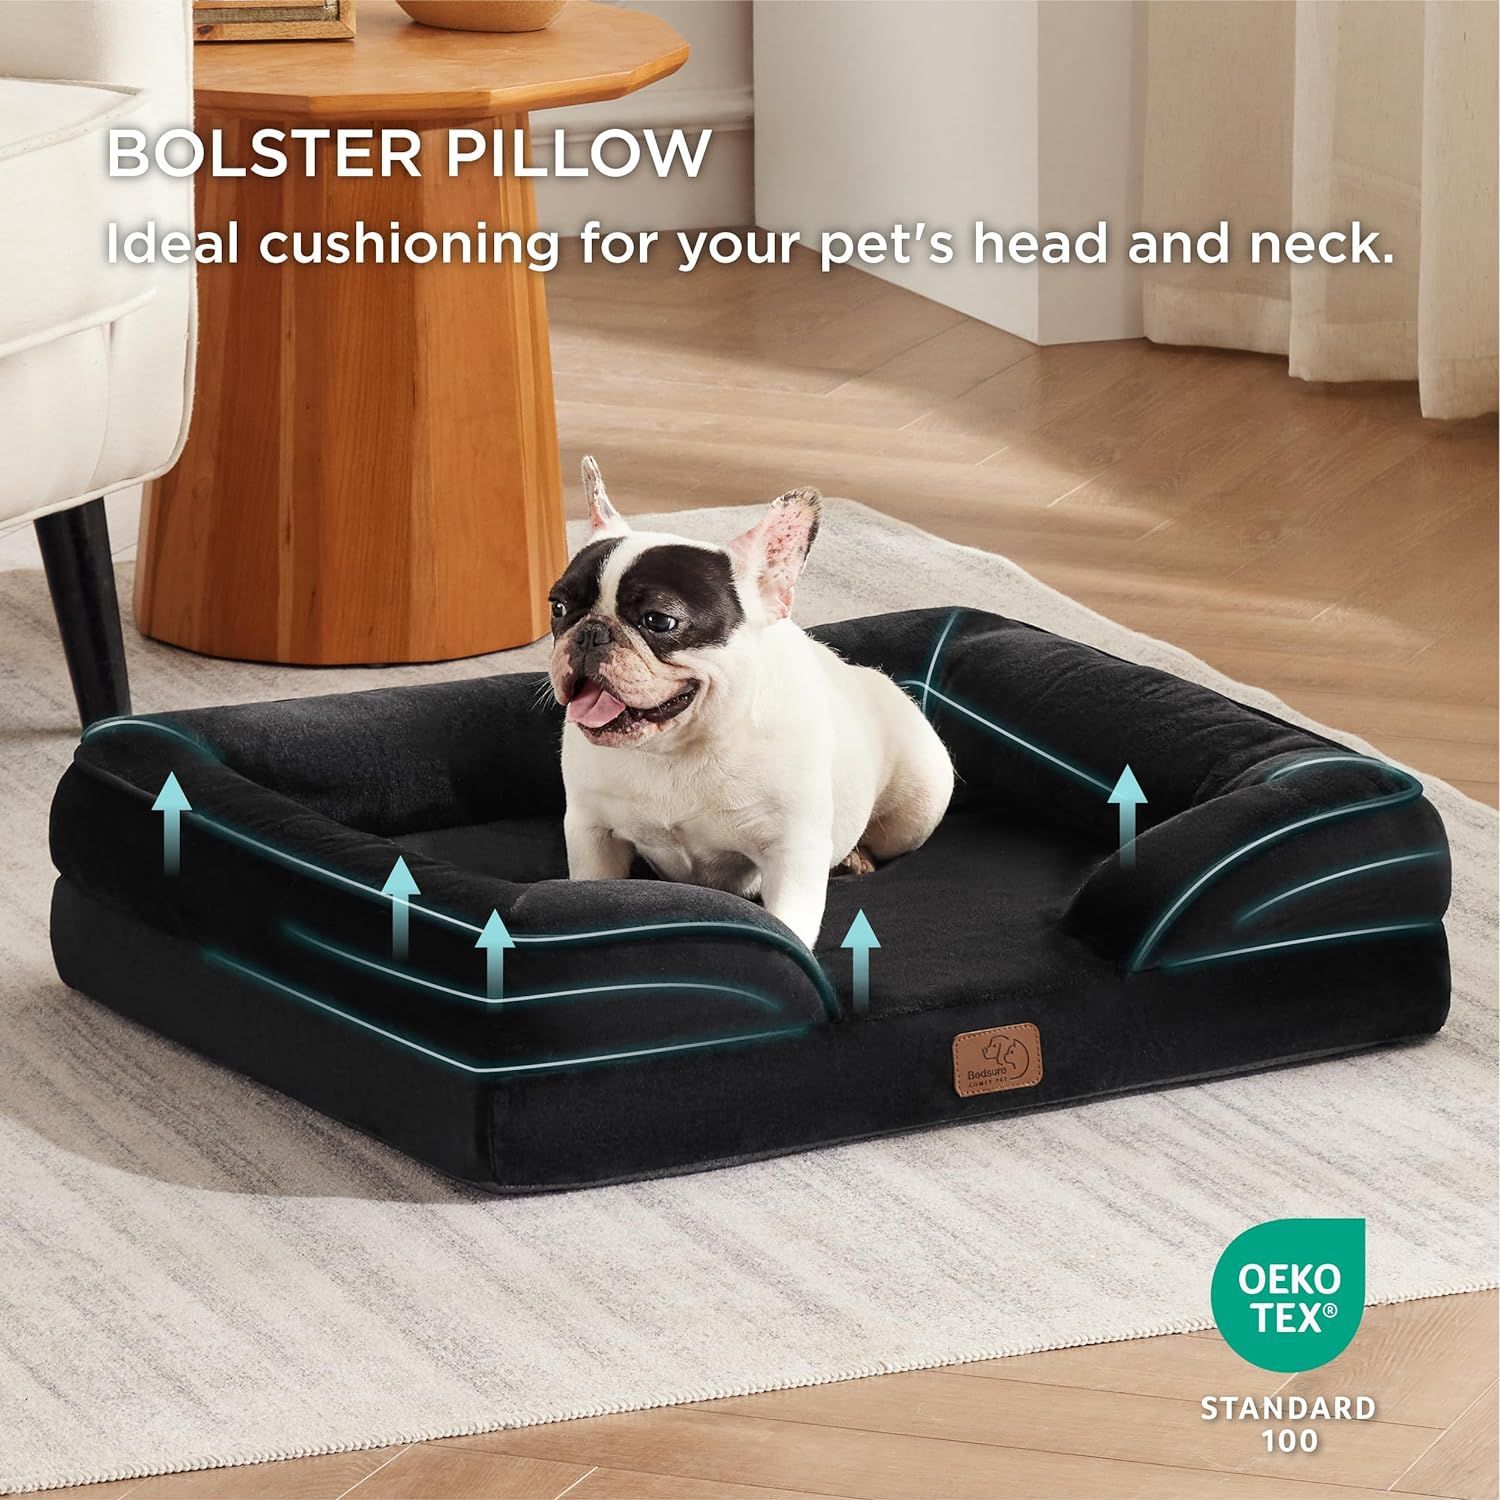 🐶Pet Bed - Washable Sofa With Removable Cover, Waterproof Lining, Nonskid Bottom 🐱